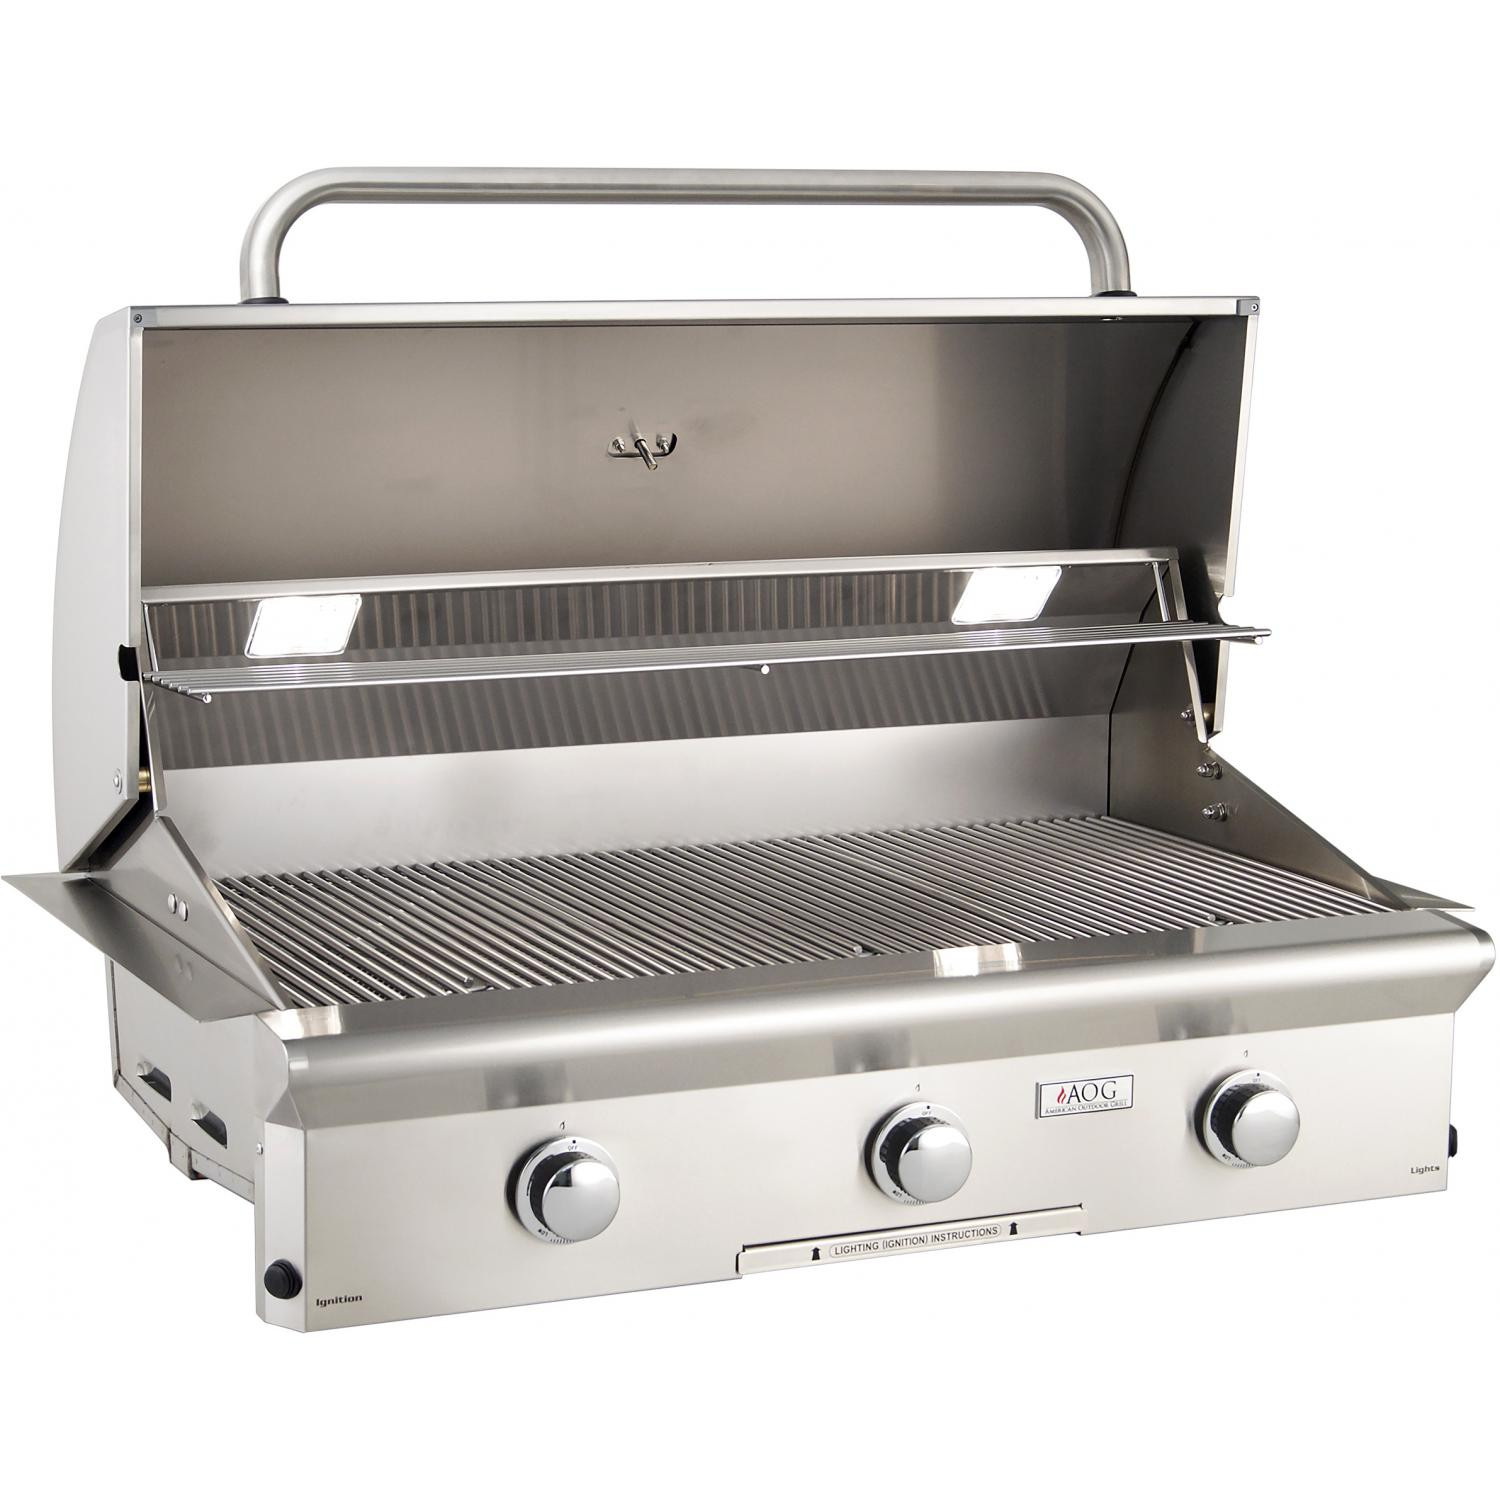 Backyard Grill Grills
 American Outdoor Grill T Series 36 Inch 3 Burner Built In